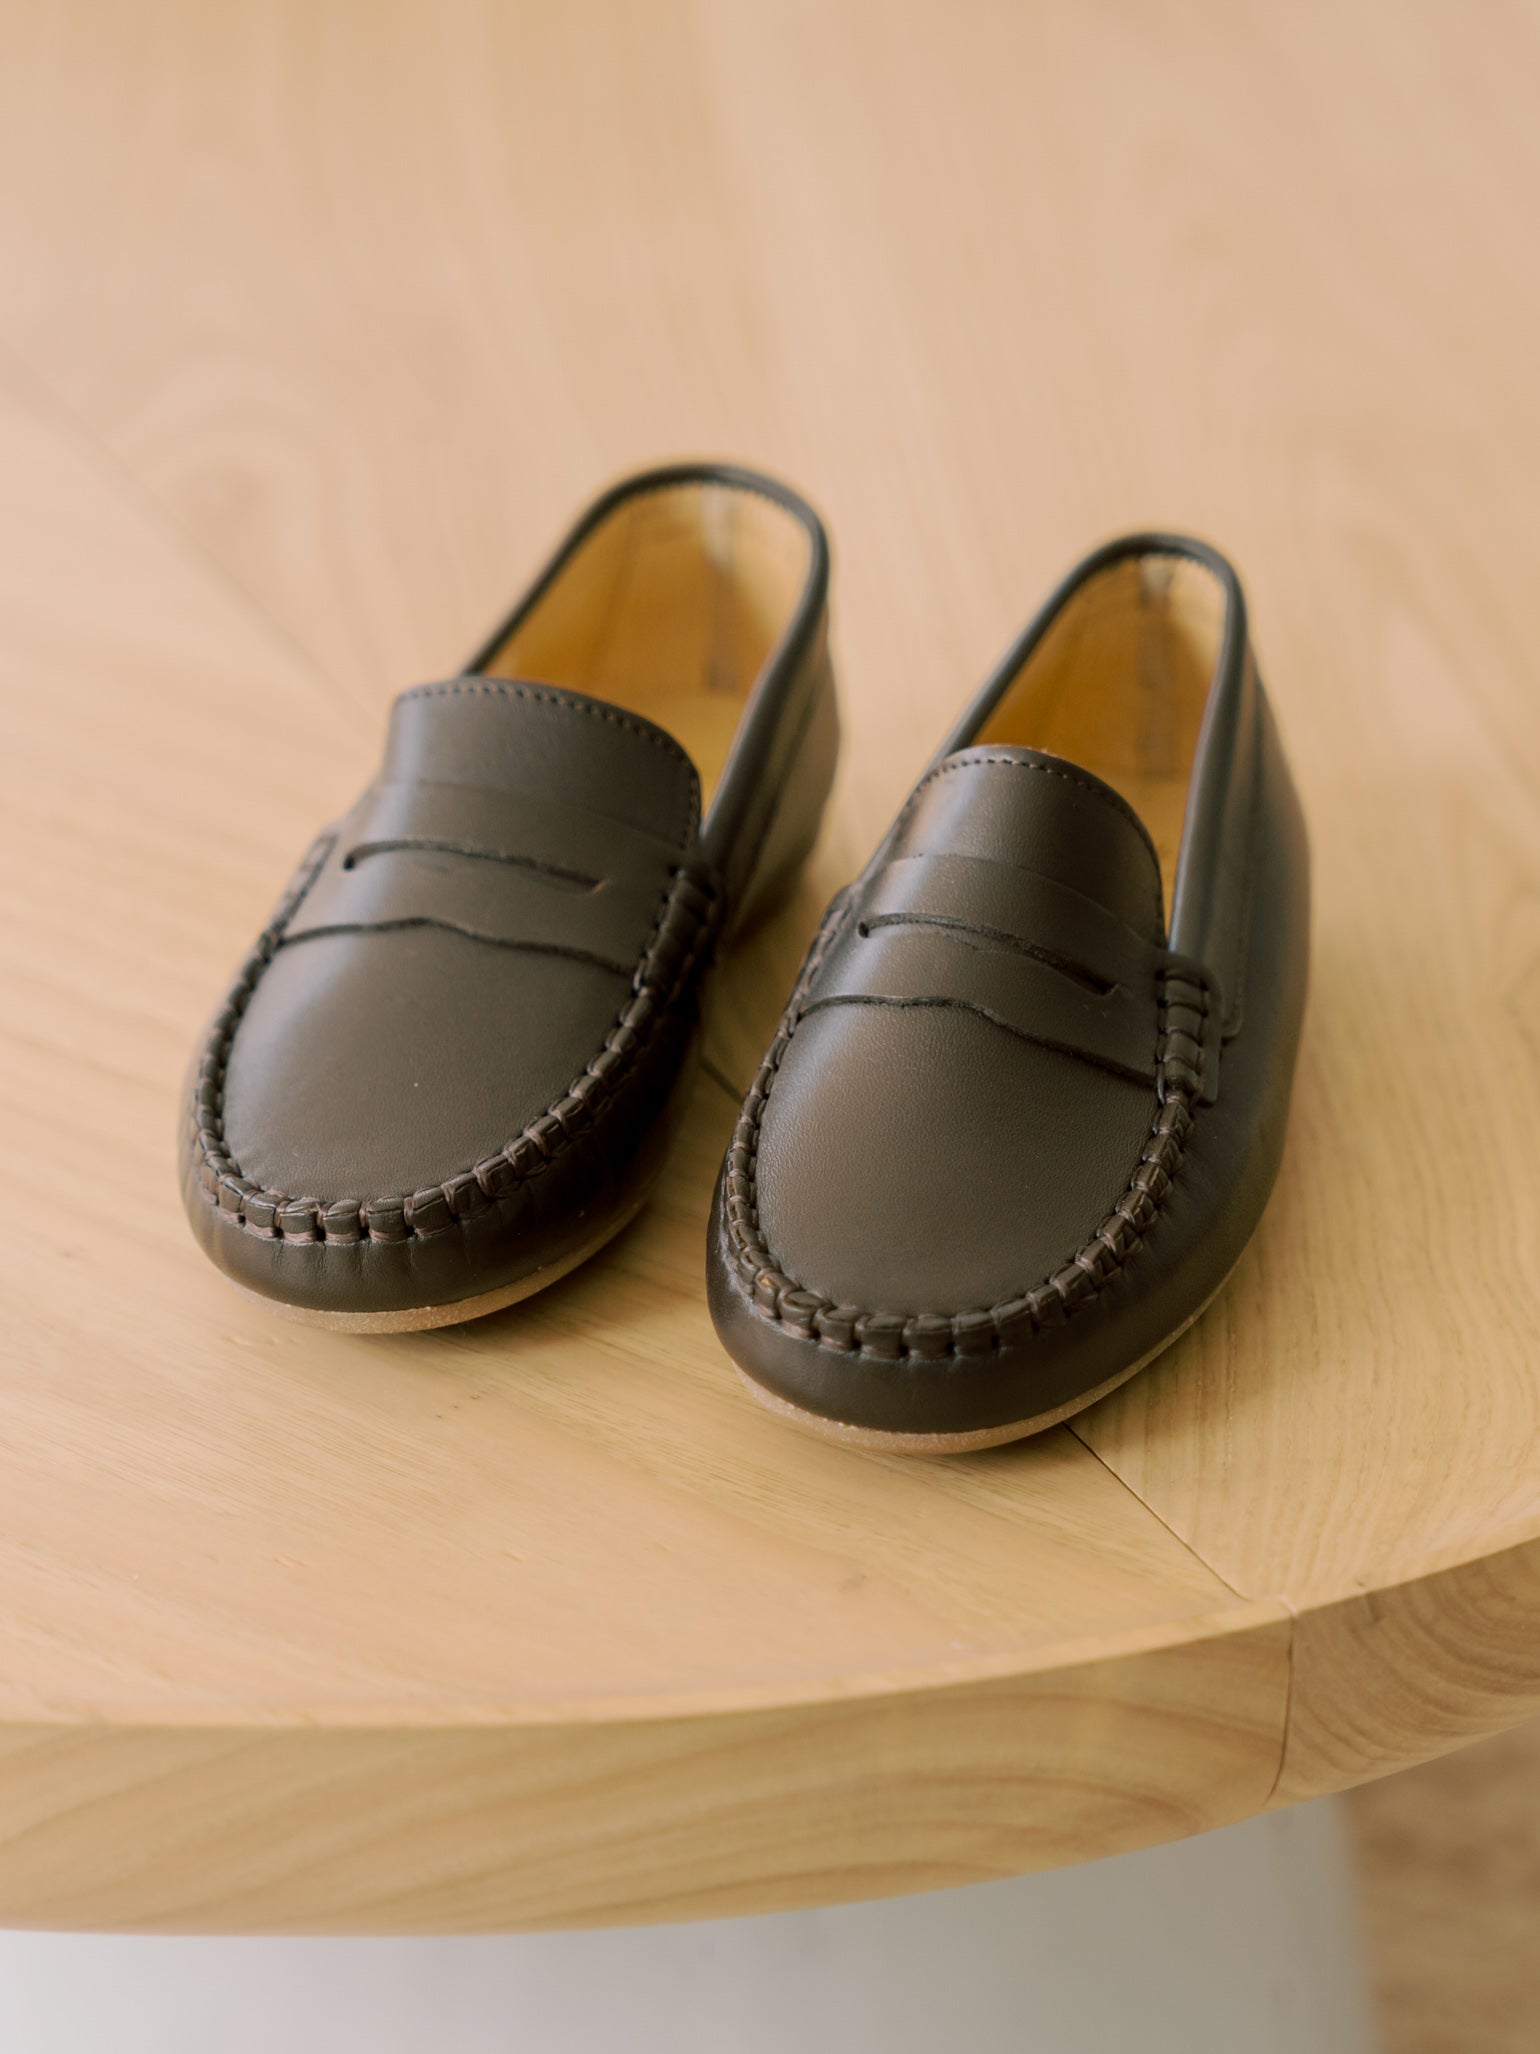 Chocolate Brown Leather Boy Loafer Shoes